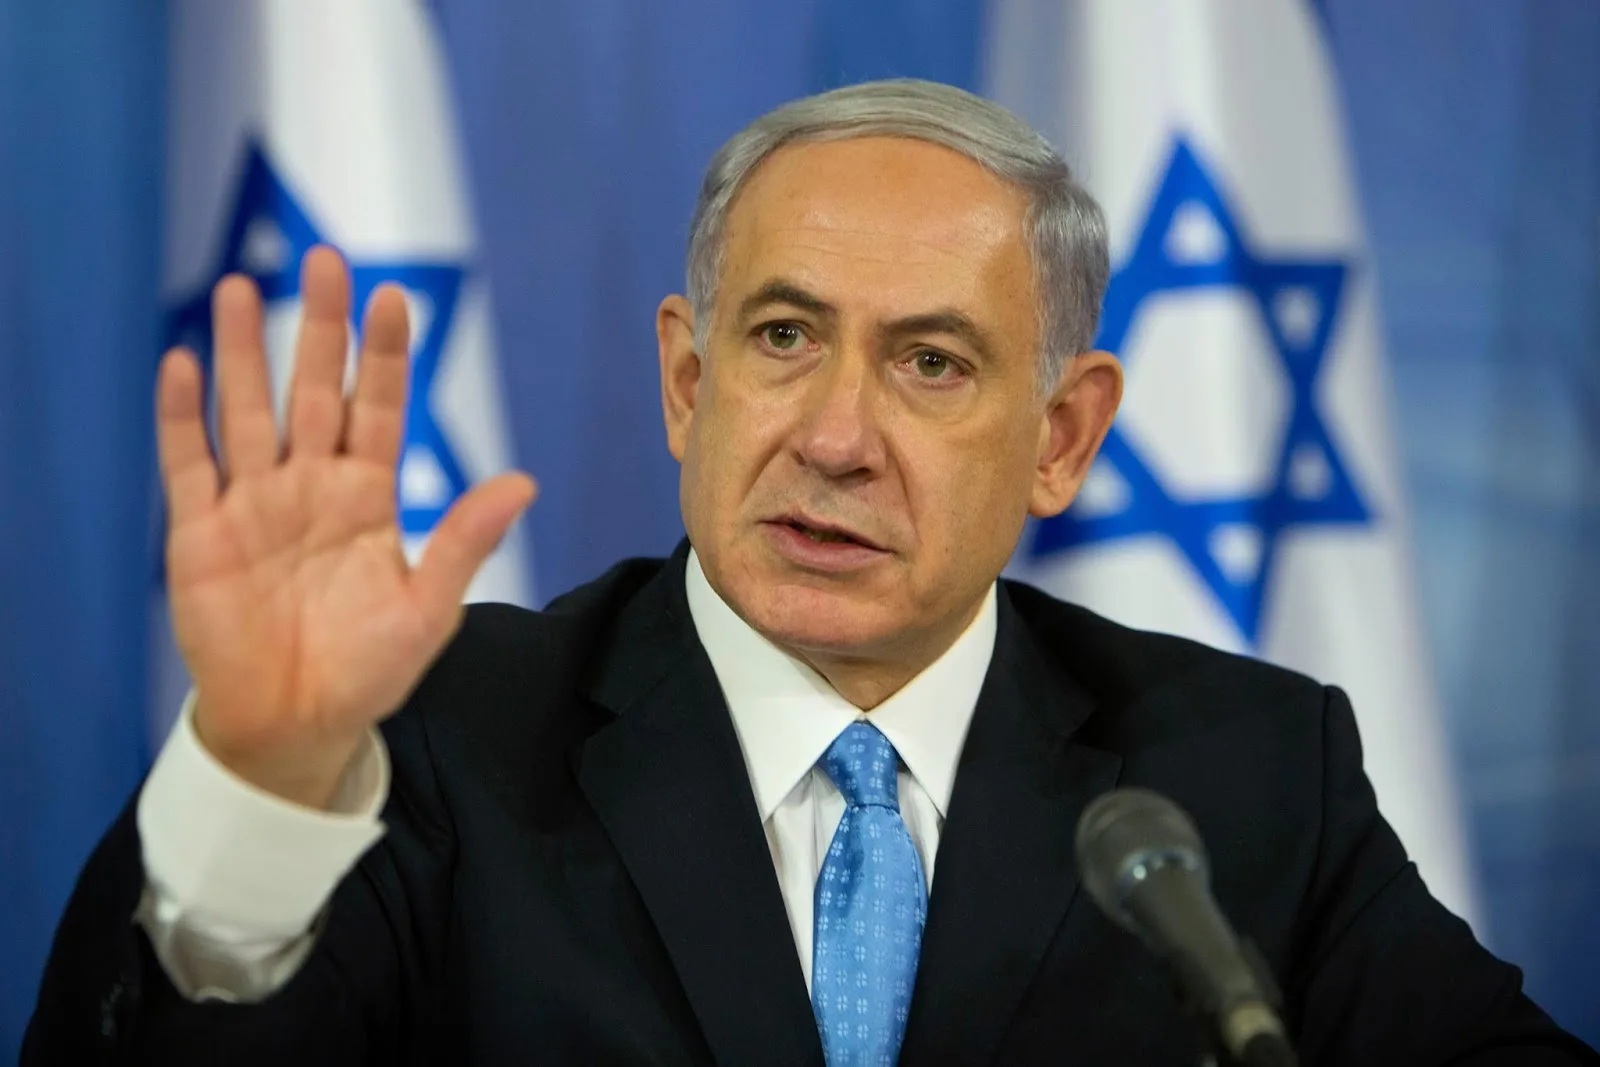 israel-prime-minister-benjamin-netanyahu-to-pay-a-state-visit-to-uganda-in-july